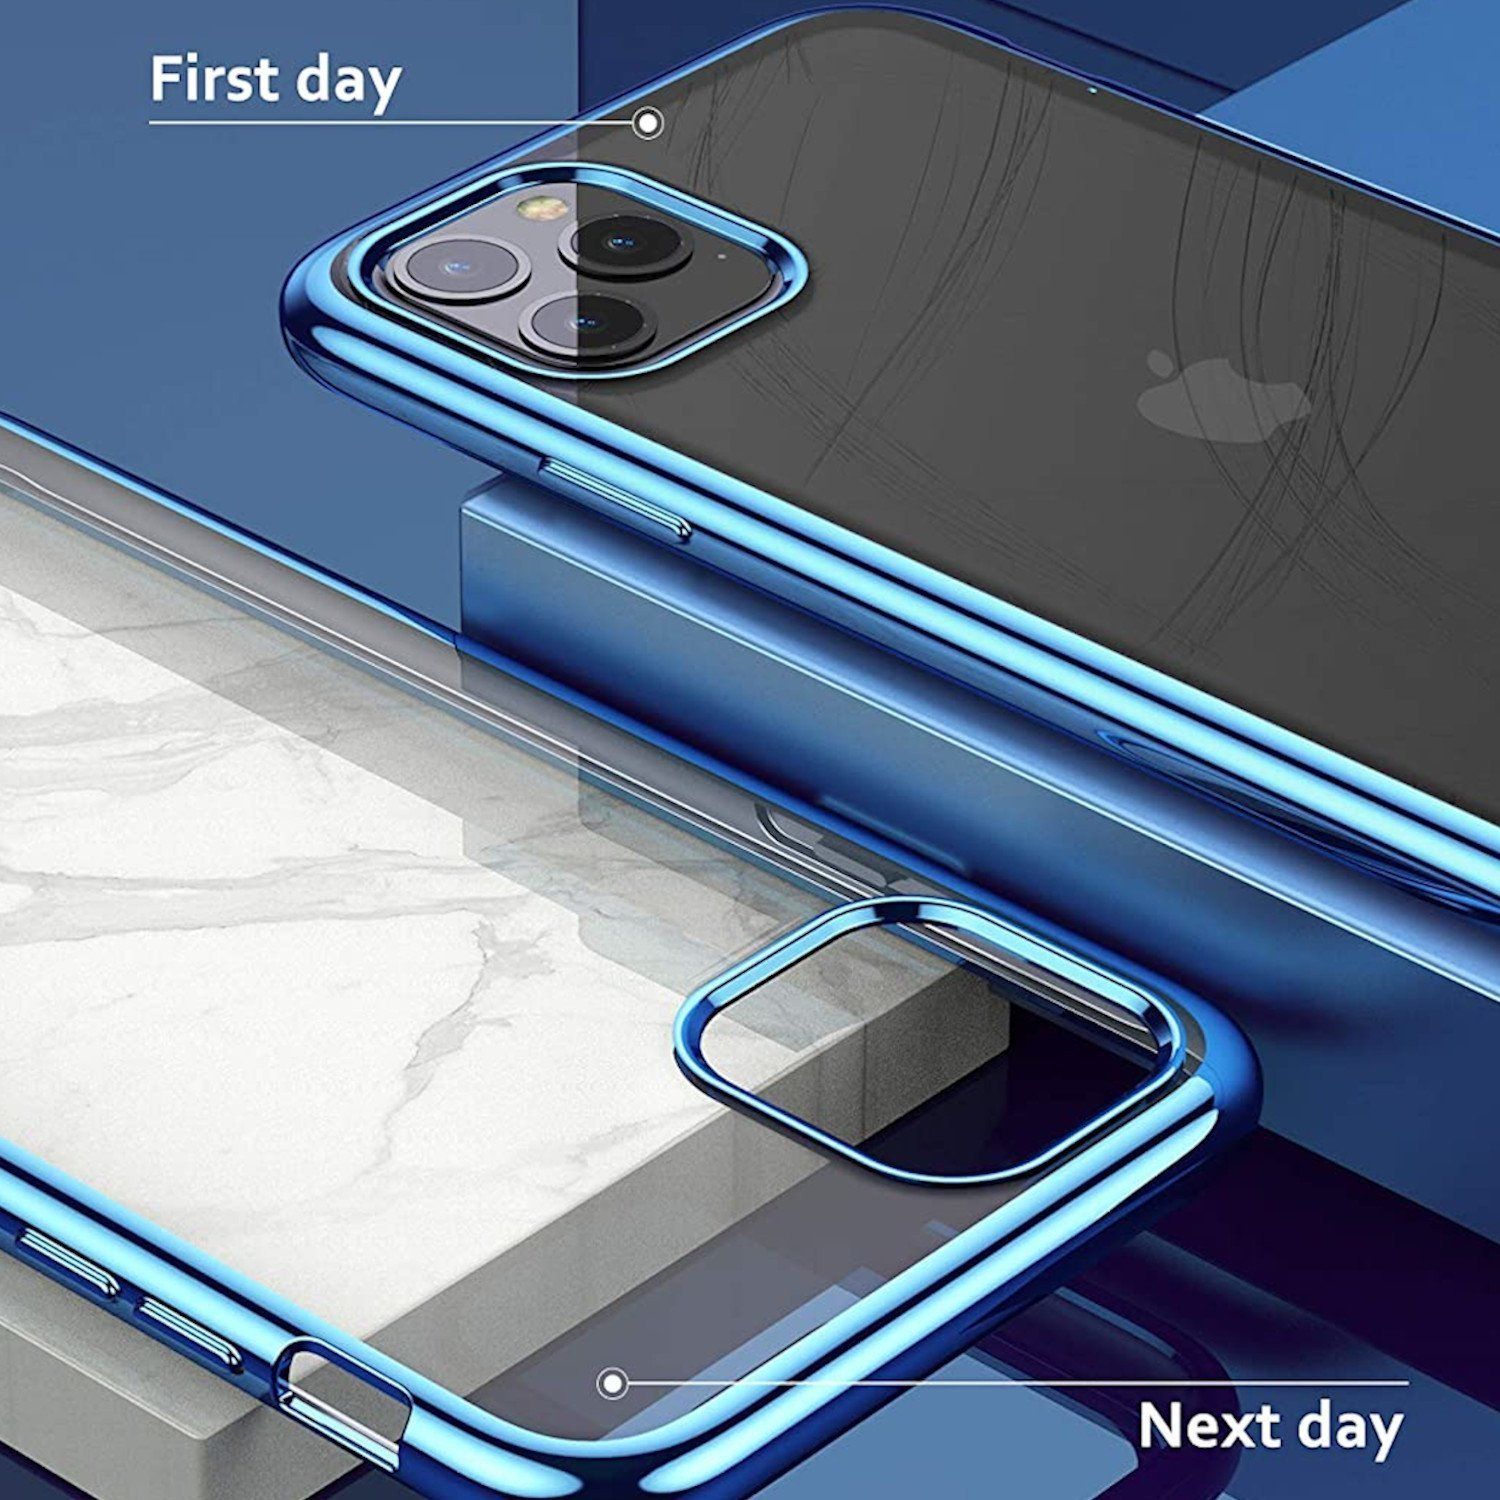 Supcase UB Electro Series Slim Hybrid Full-Body Protective Case for iPhone 11 Pro 5.8"(2019)(With Build-in Screen Protector)